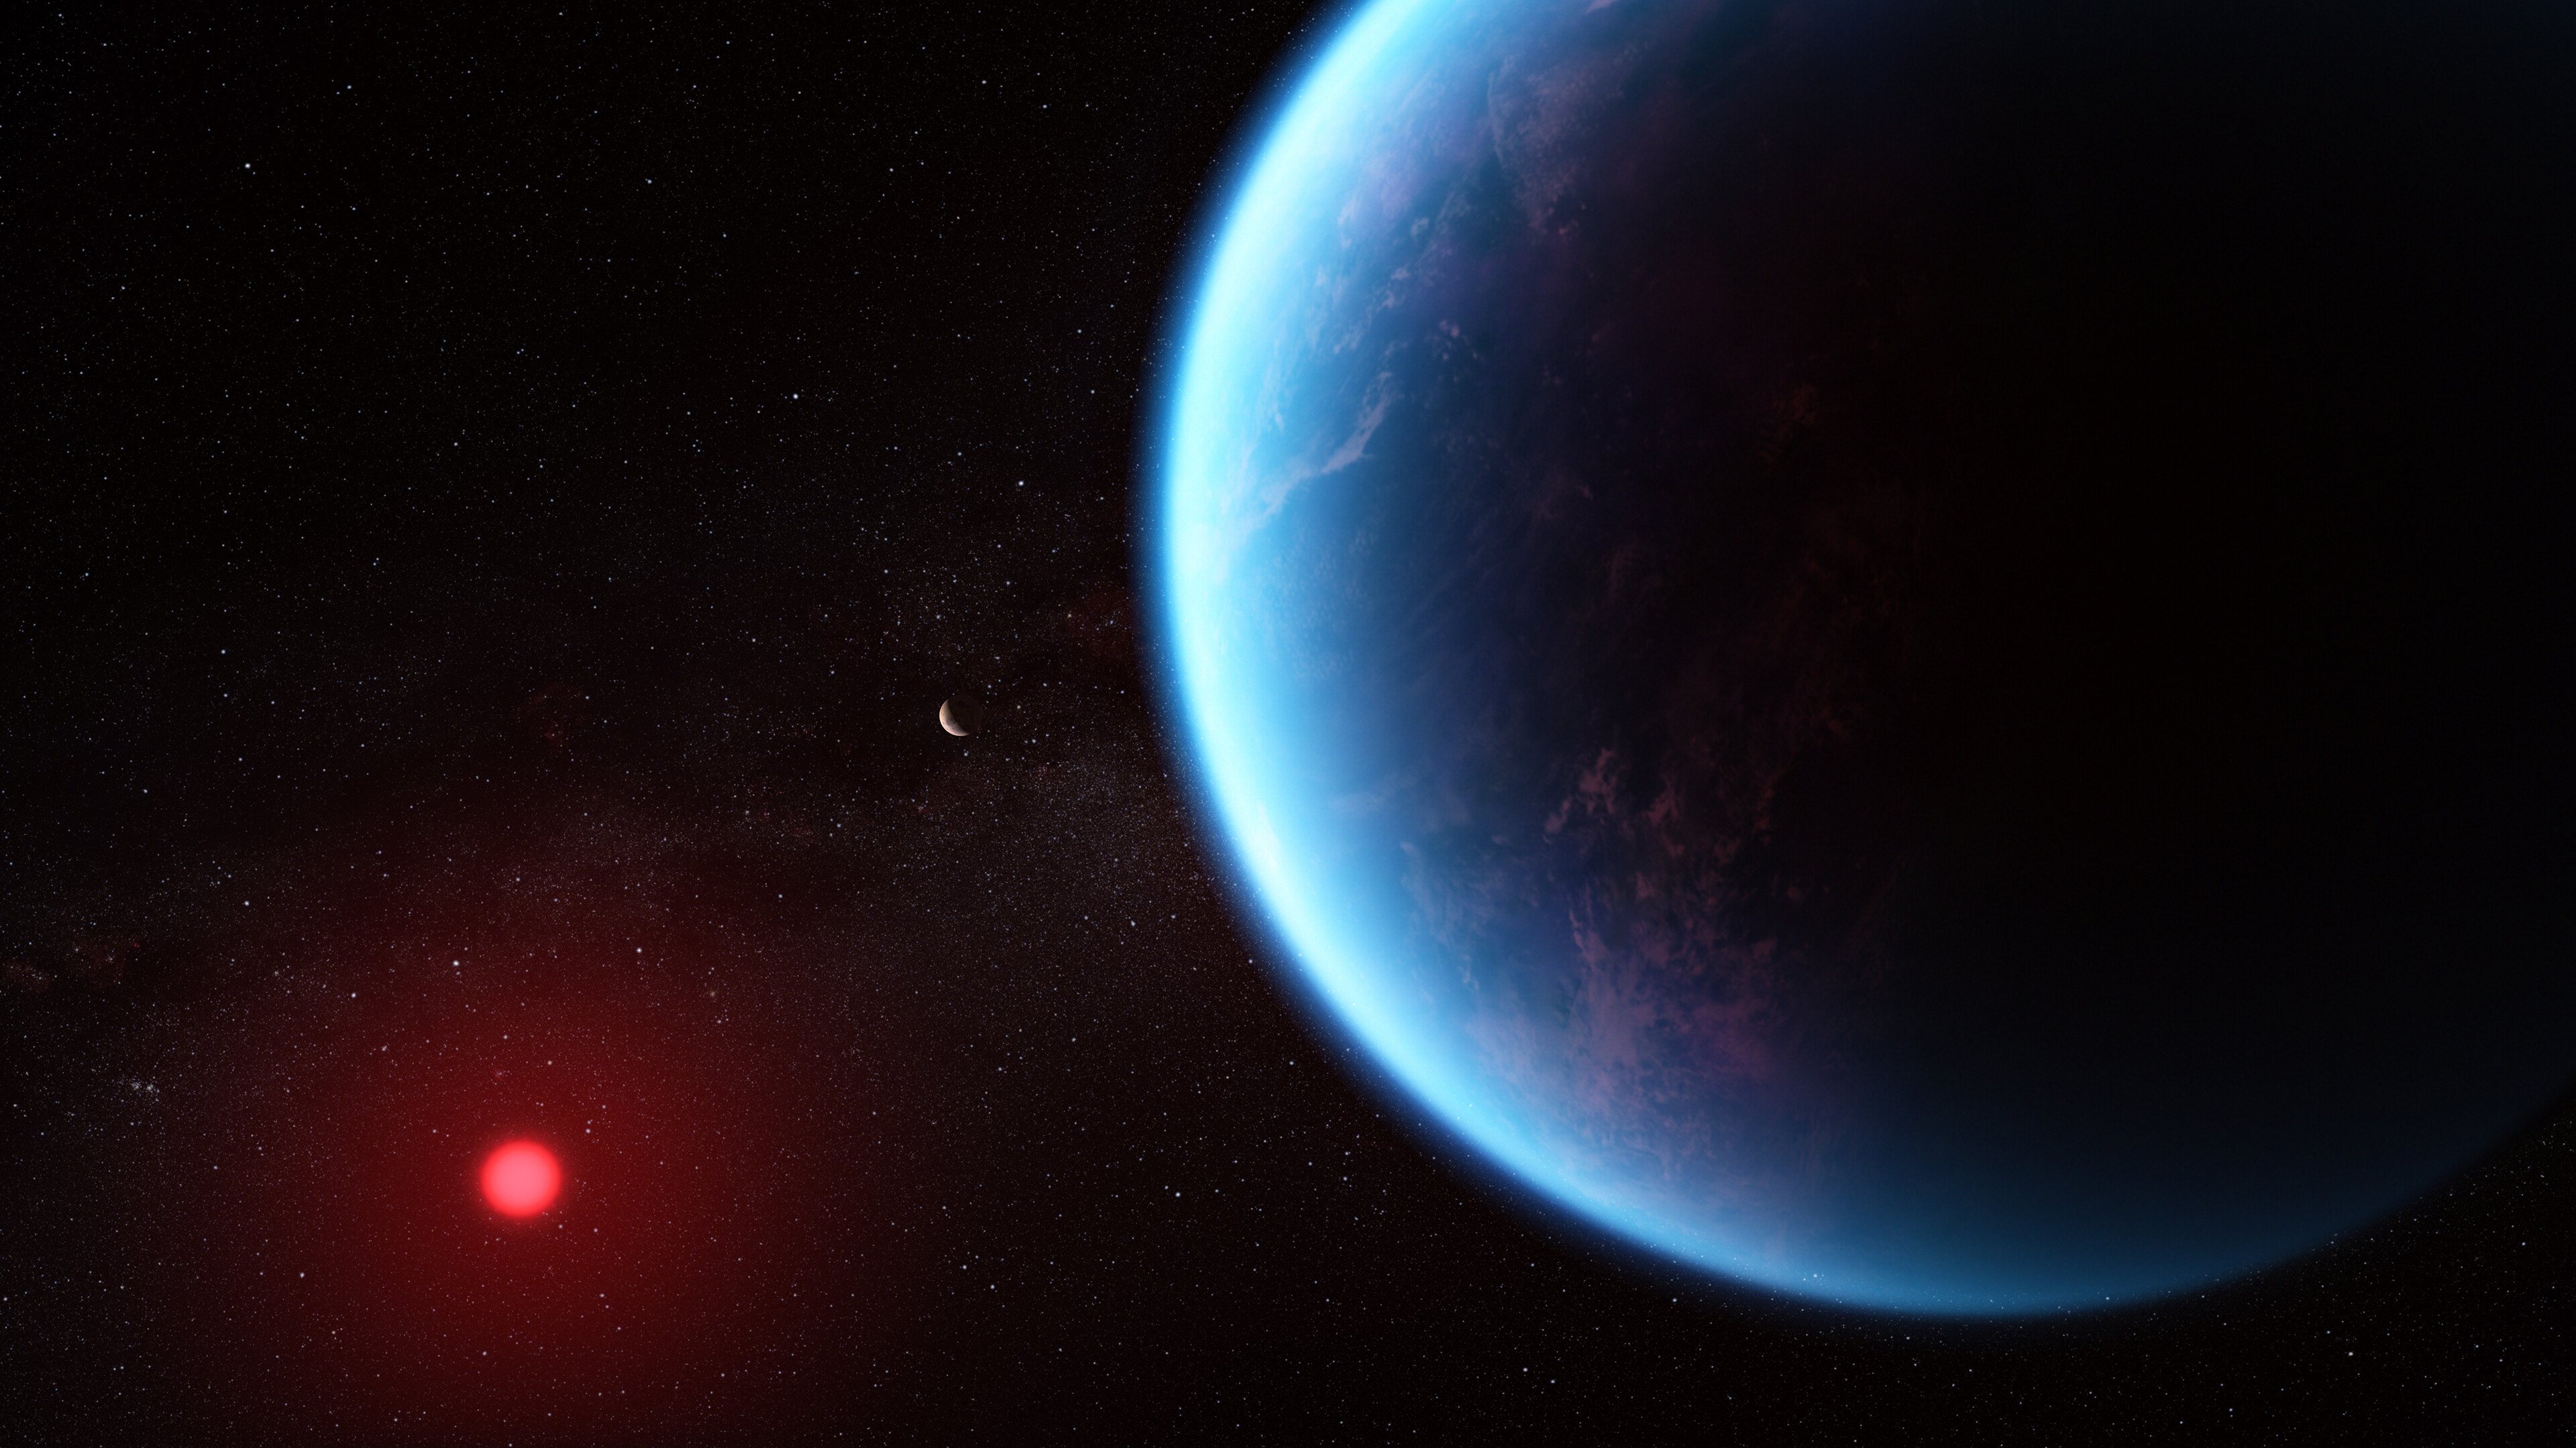 Illustration of an exoplanet planet and its red cool dwarf star on a black background that is speckled with some small stars. The planet is large, in the foreground on the right and the star is smaller, in the background at the lower left. The planet is various shades of blue, with wisps of white scattered throughout. The left edge of the planet (the side facing the star) is lit, while the rest is in shadow. The star has a bright red glow.